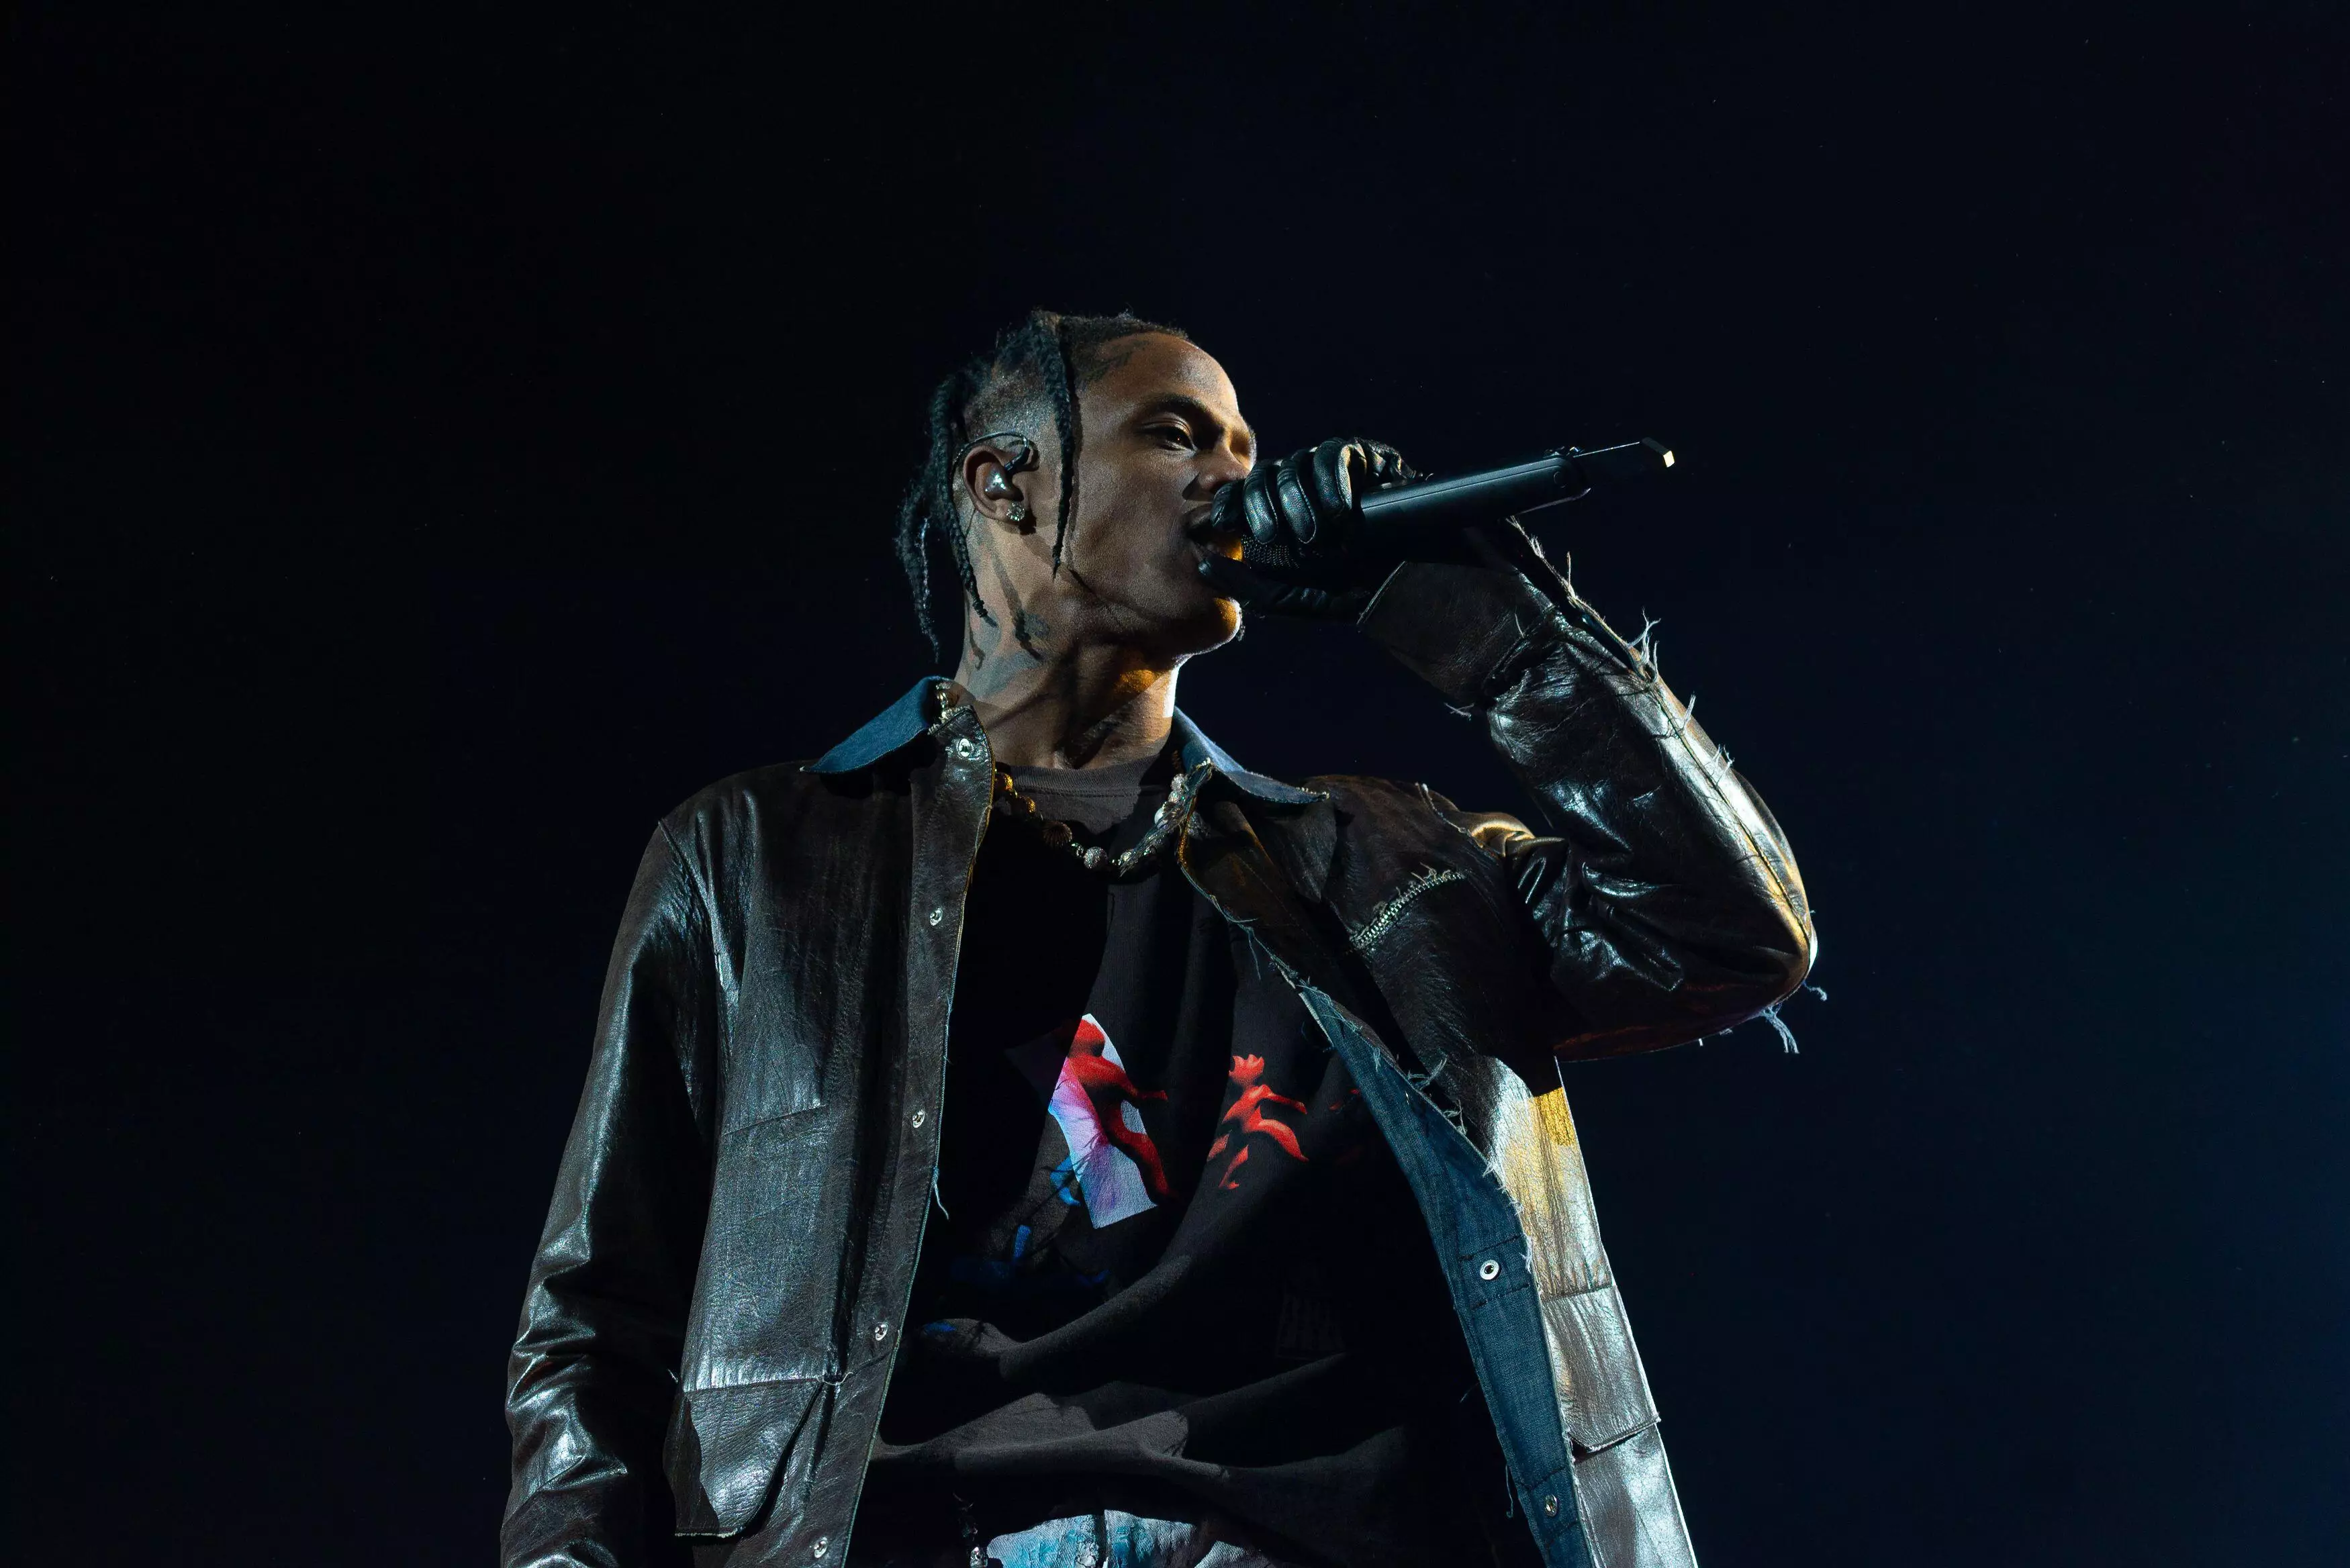 A lawsuit on behalf of around 125 people who attended the Astroworld concert has been filed against rapper Travis Scott.